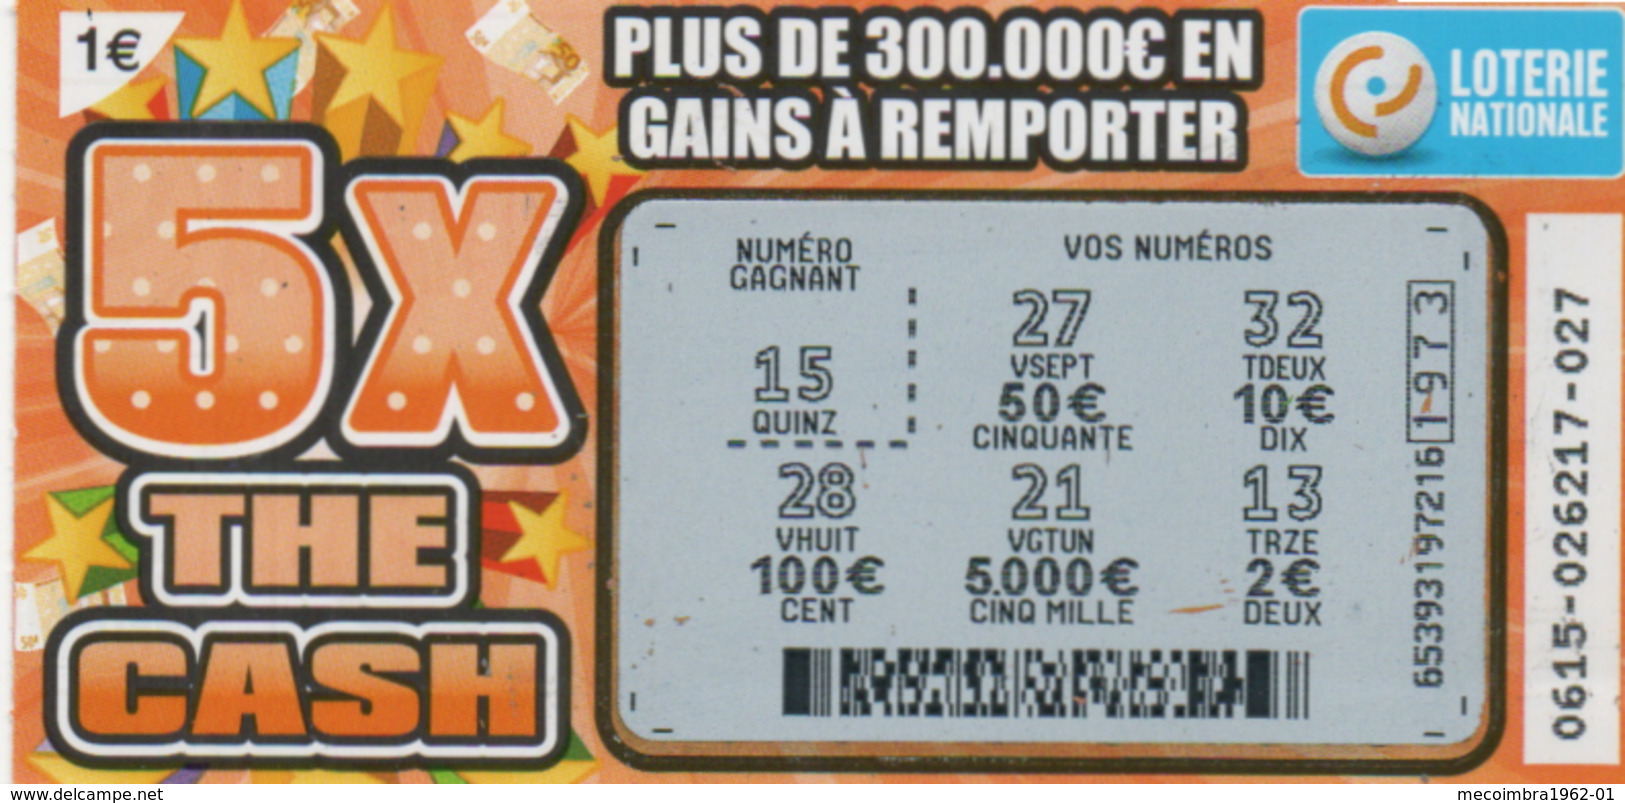 LUXEMBOURG / BILLET DE LOTERIE NATIONALE / RASPADINHA THE CASH - Lottery Tickets